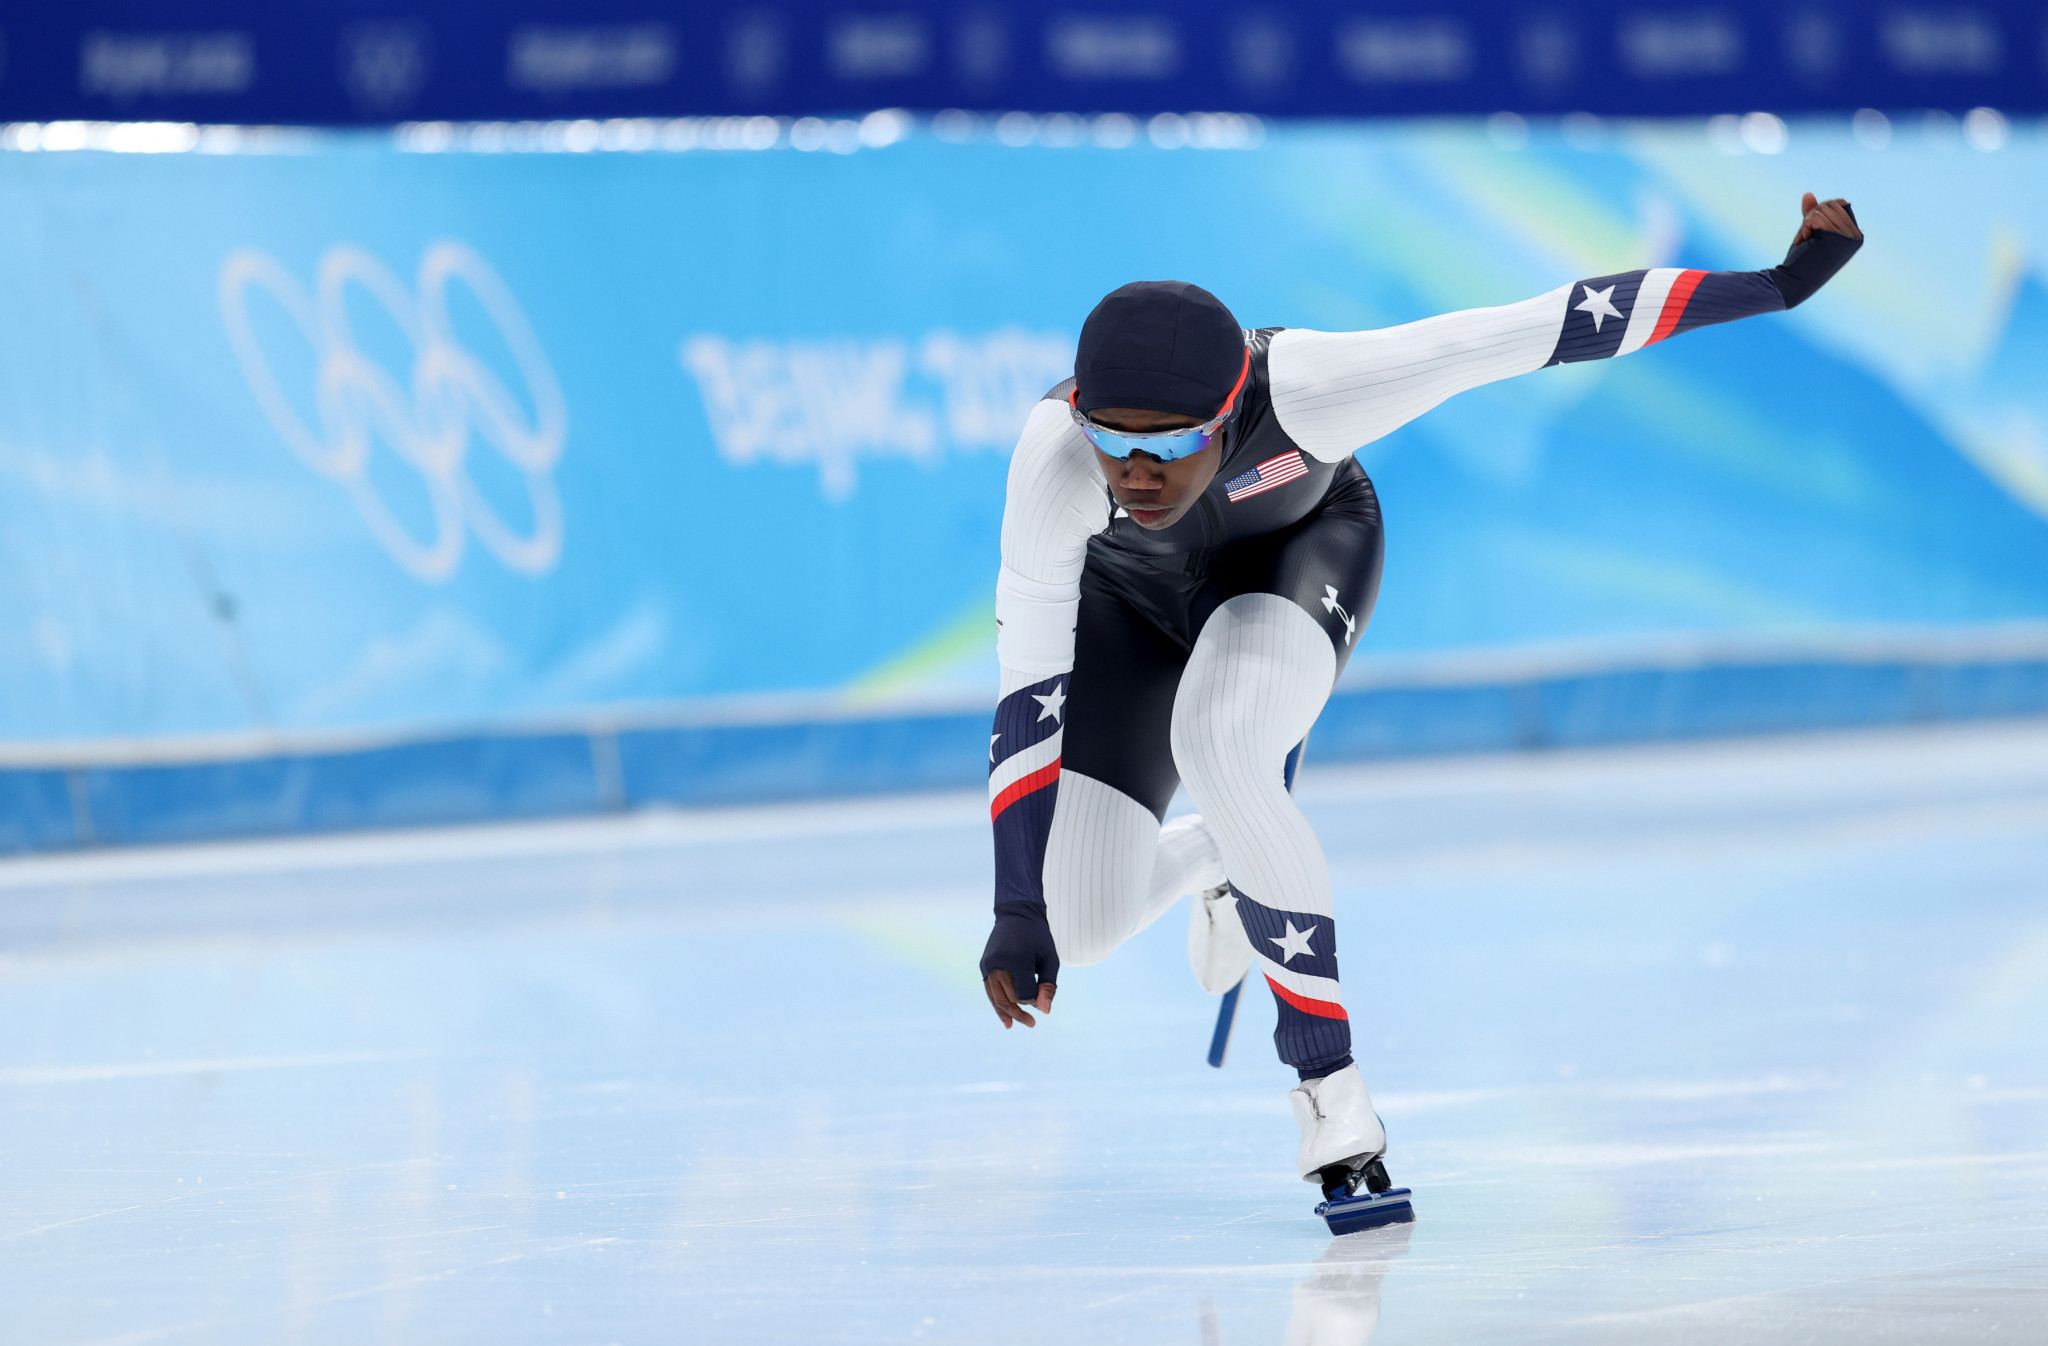 Erin Jackson of the United States became the first black woman to win an individual Winter Olympic gold by claiming the women’s 500 metres speed skating title ©Getty Images